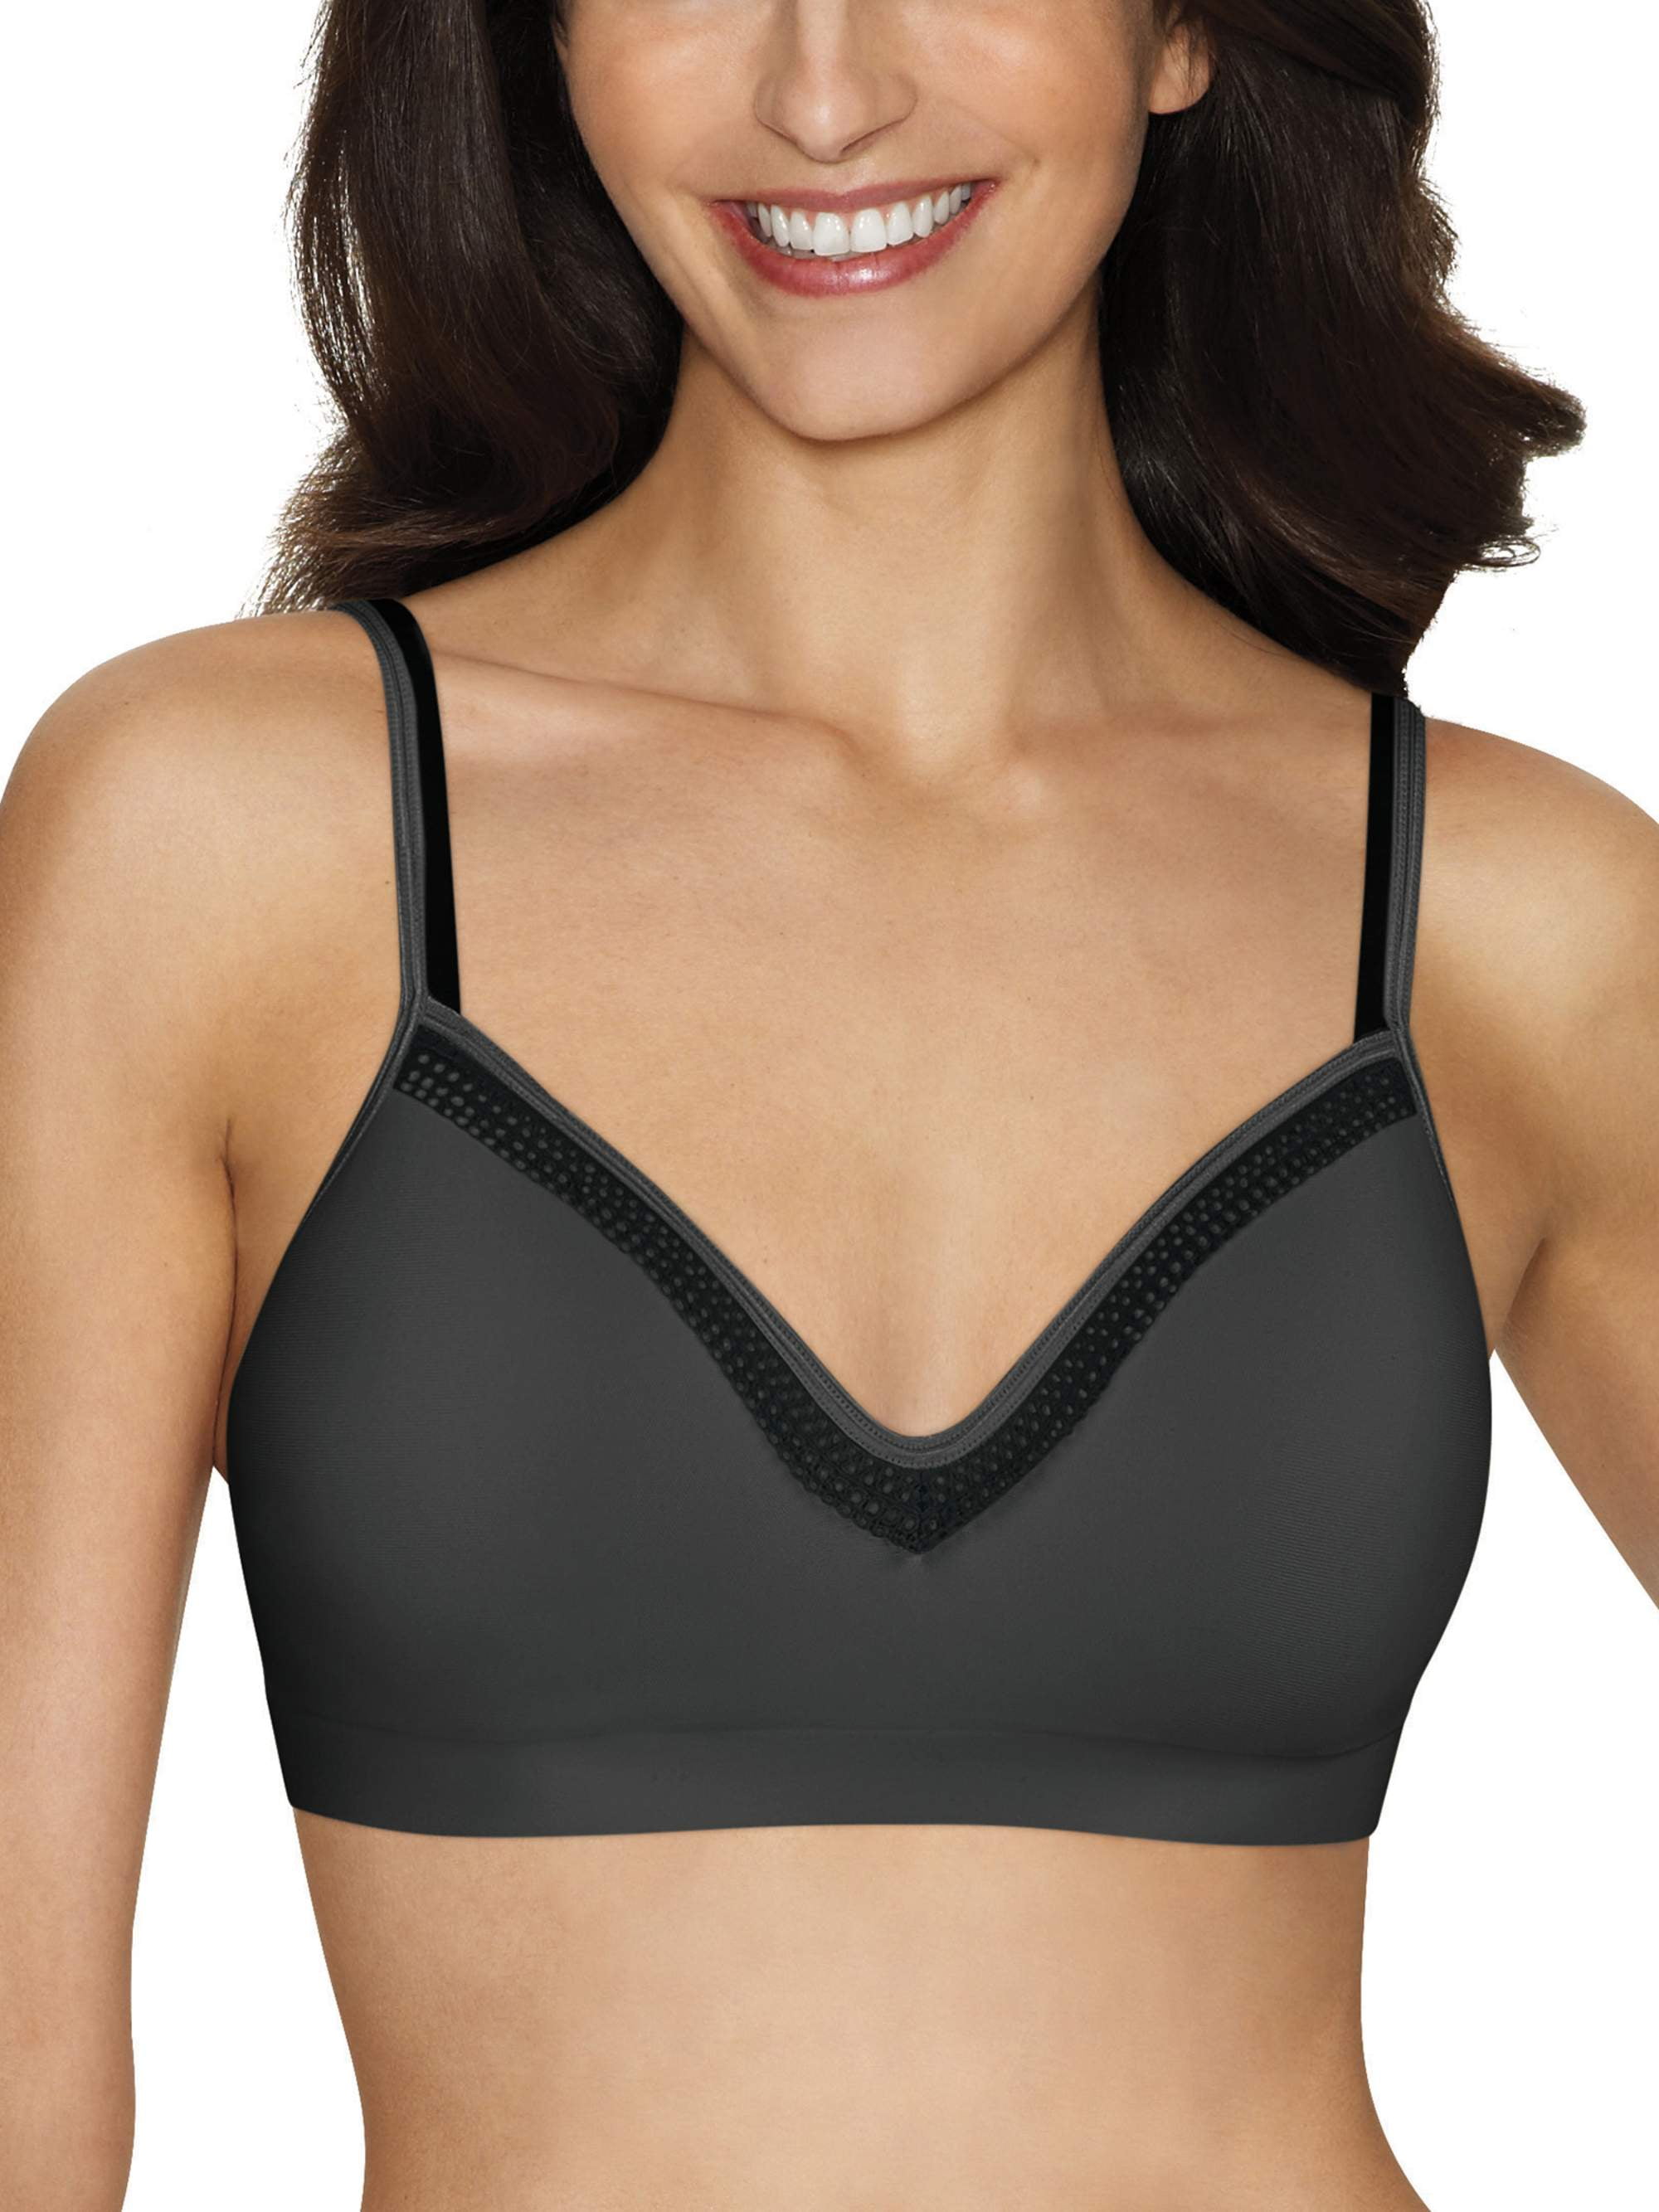 Hanes Women's SmoothTec ComfortFlex Fit Lace Wirefree Bra, Style G199 